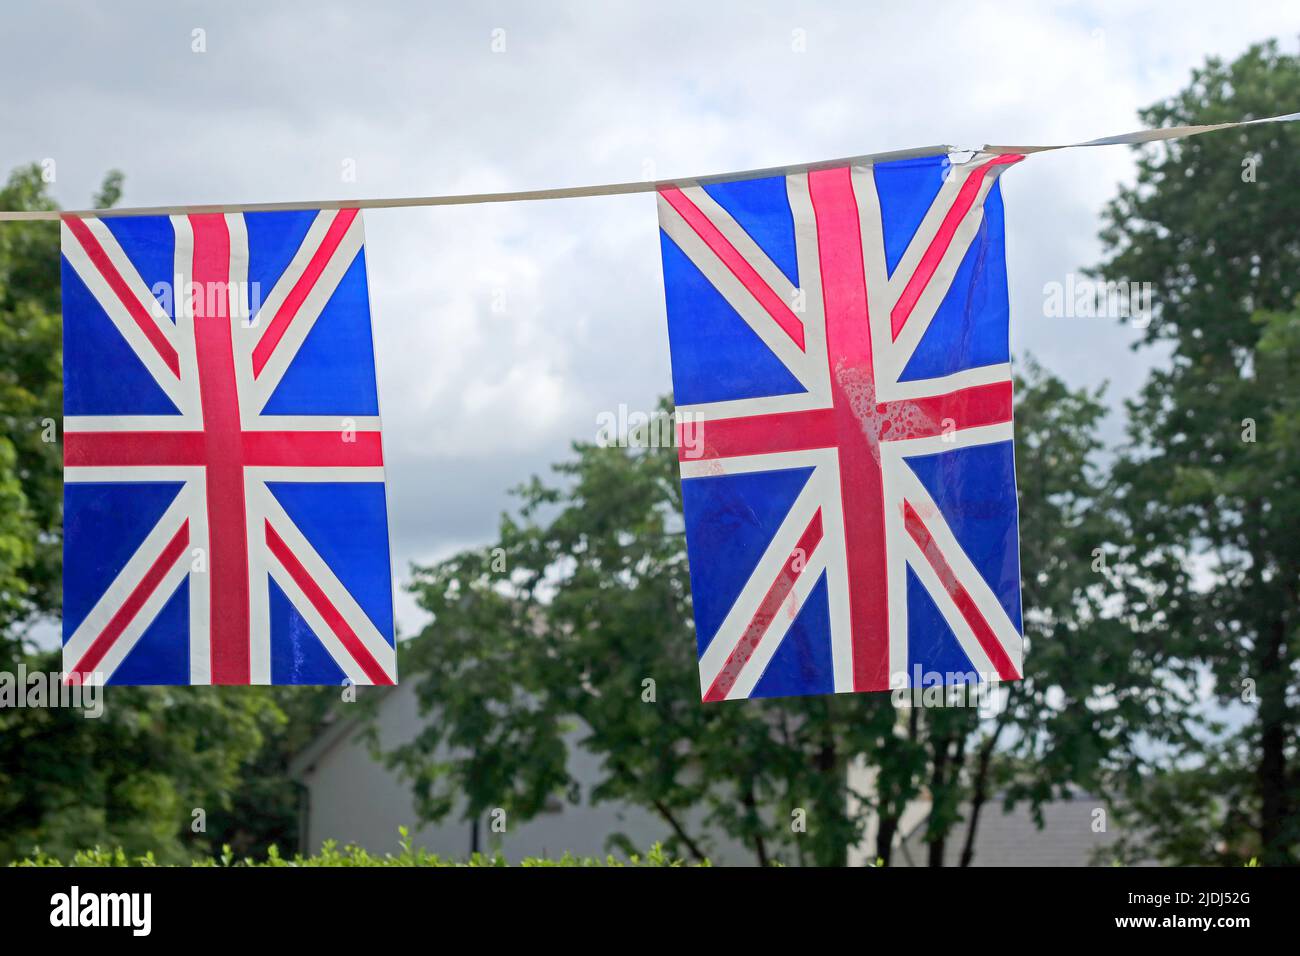 Two union jack flags - royal events, Jubllee, death of Queen Elizabeth, coronation of King Charles III Stock Photo